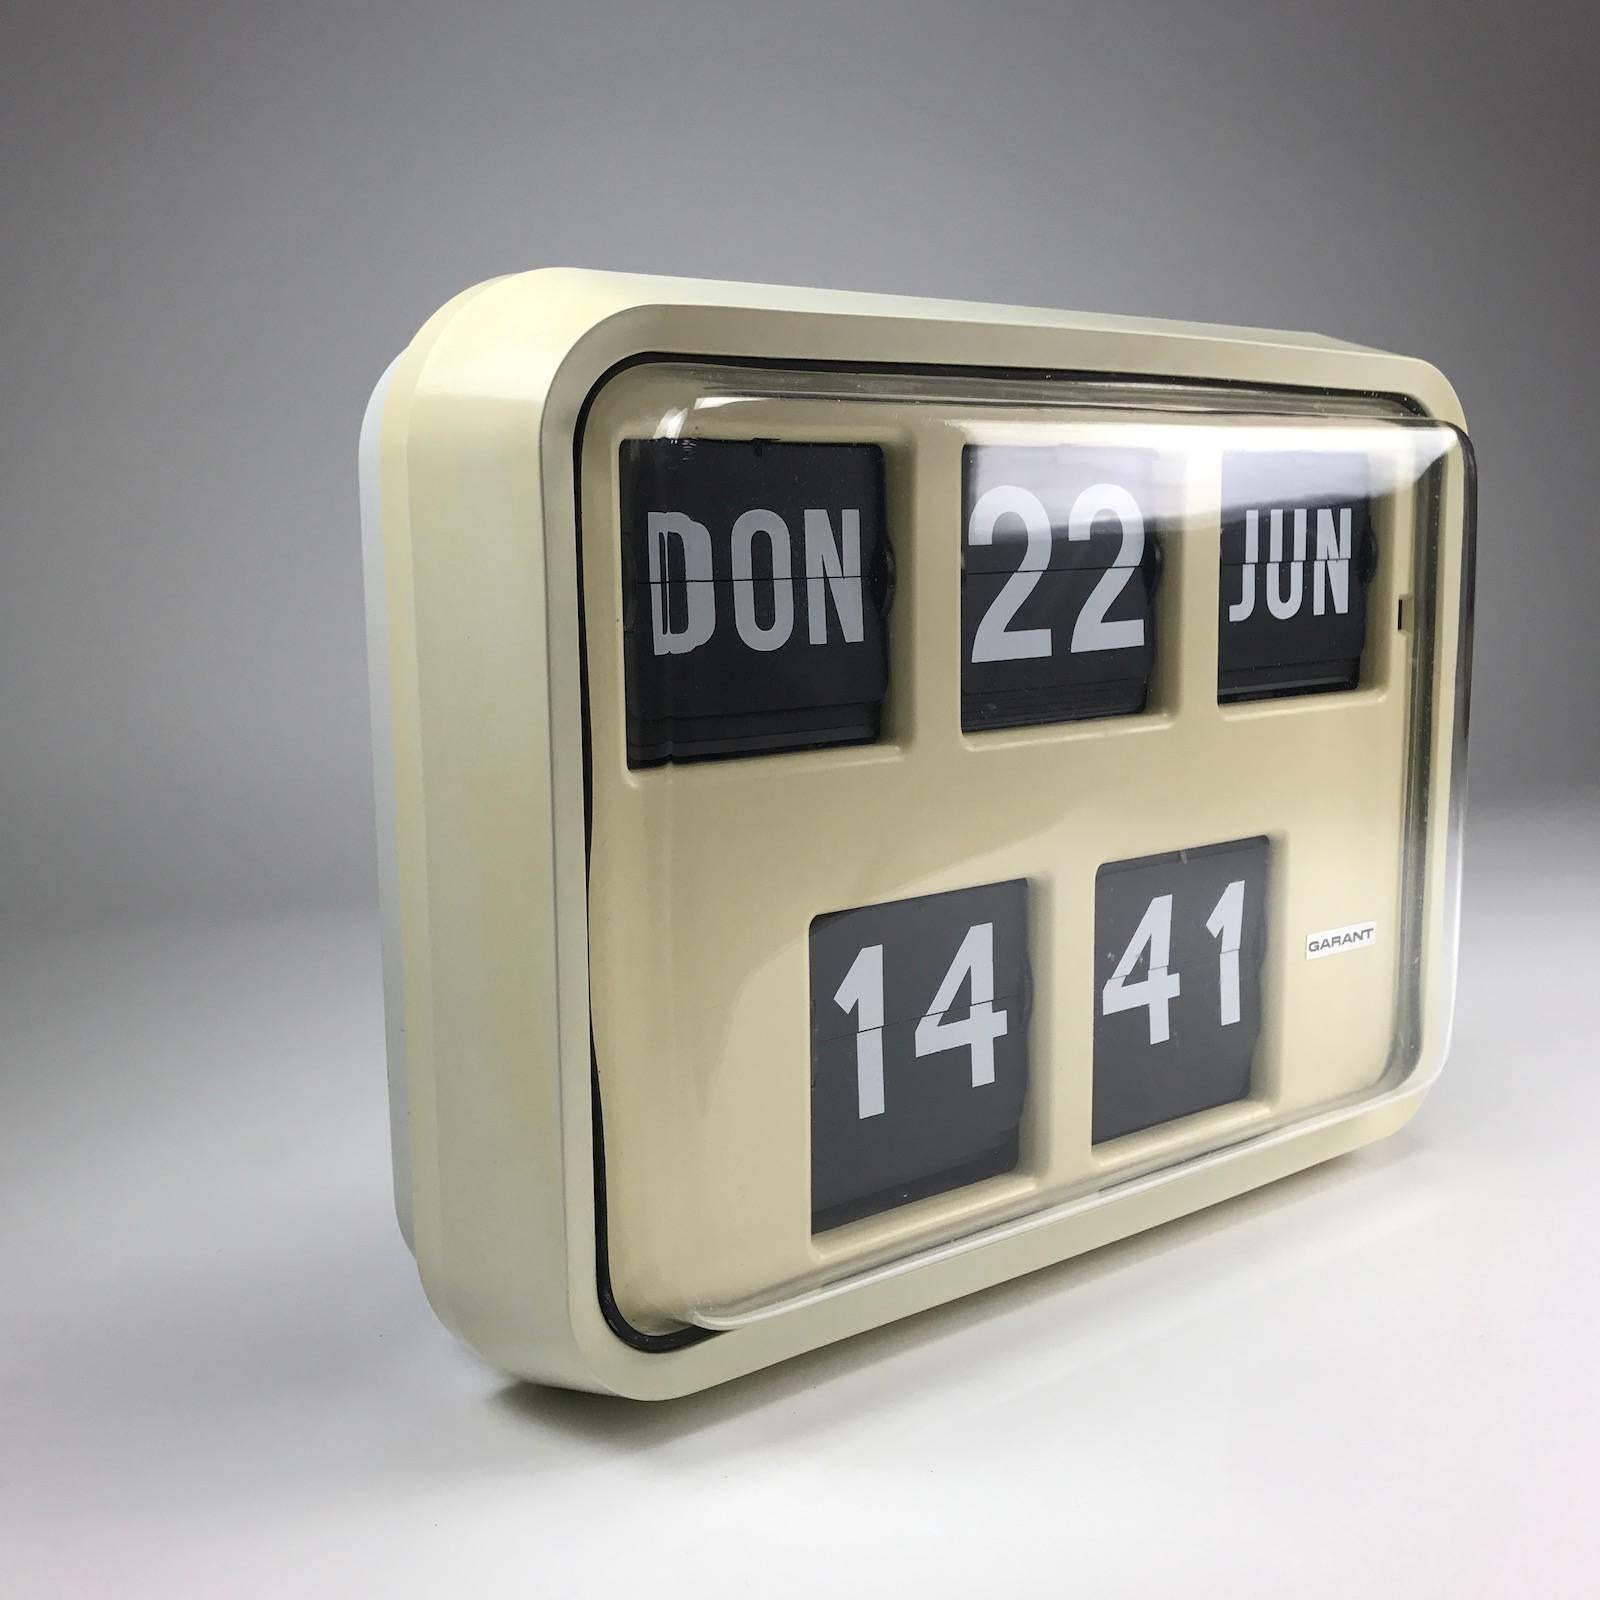 Rare piece of high quality made flip clock by German Garant model number DT 17.

Works perfectly with few age related signs. 

A highly sought after collectors piece. 

 